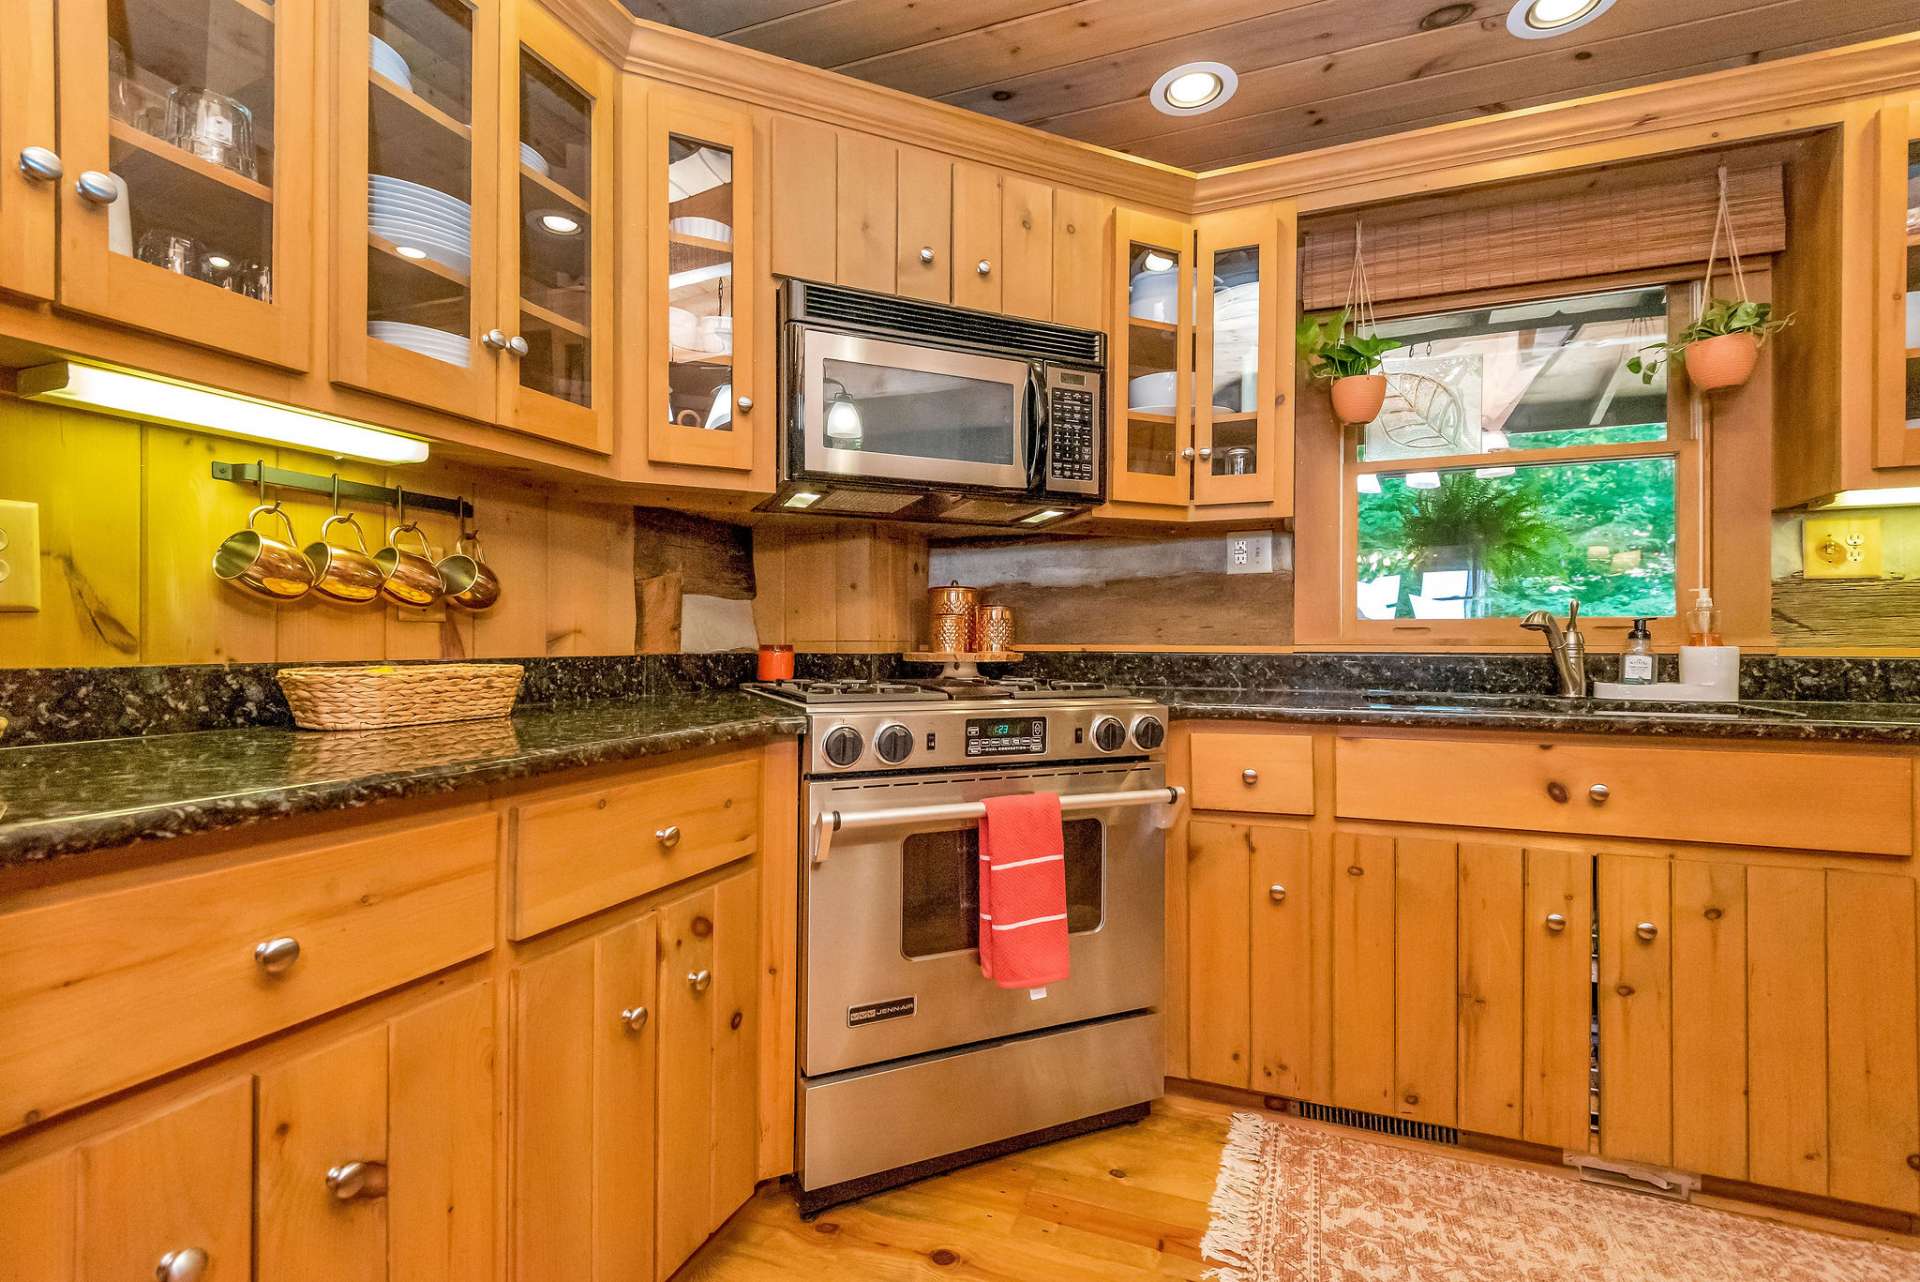 Kitchen is updated with granite countertops and stainless appliances.